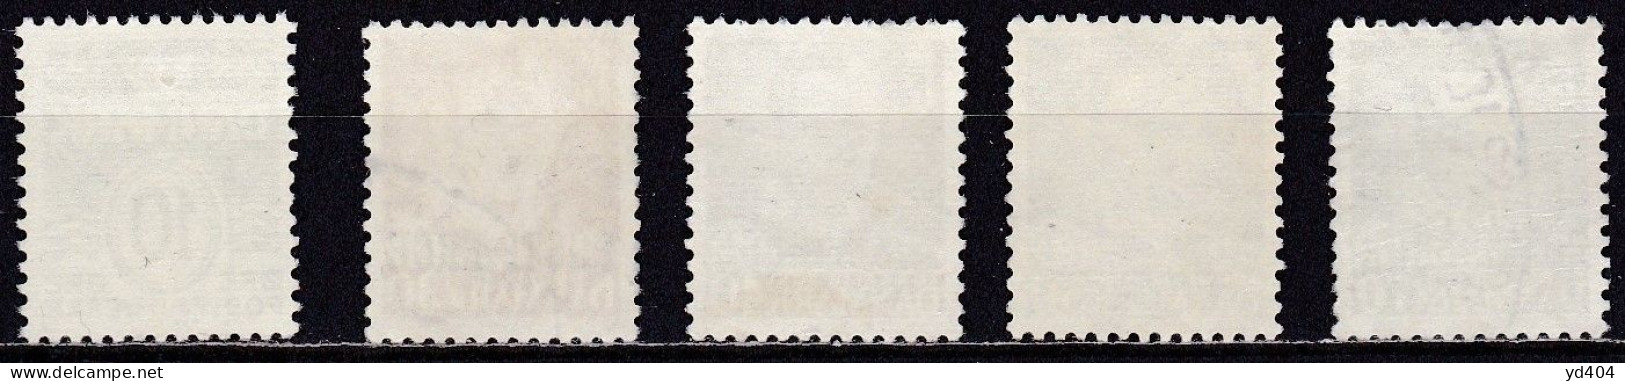 DK212 – DENMARK – 1953-55 – NUMBERS & WAVES / FREDERIC IX – Y&T # 350-367/70 USED 9,50 € - Paquetes Postales